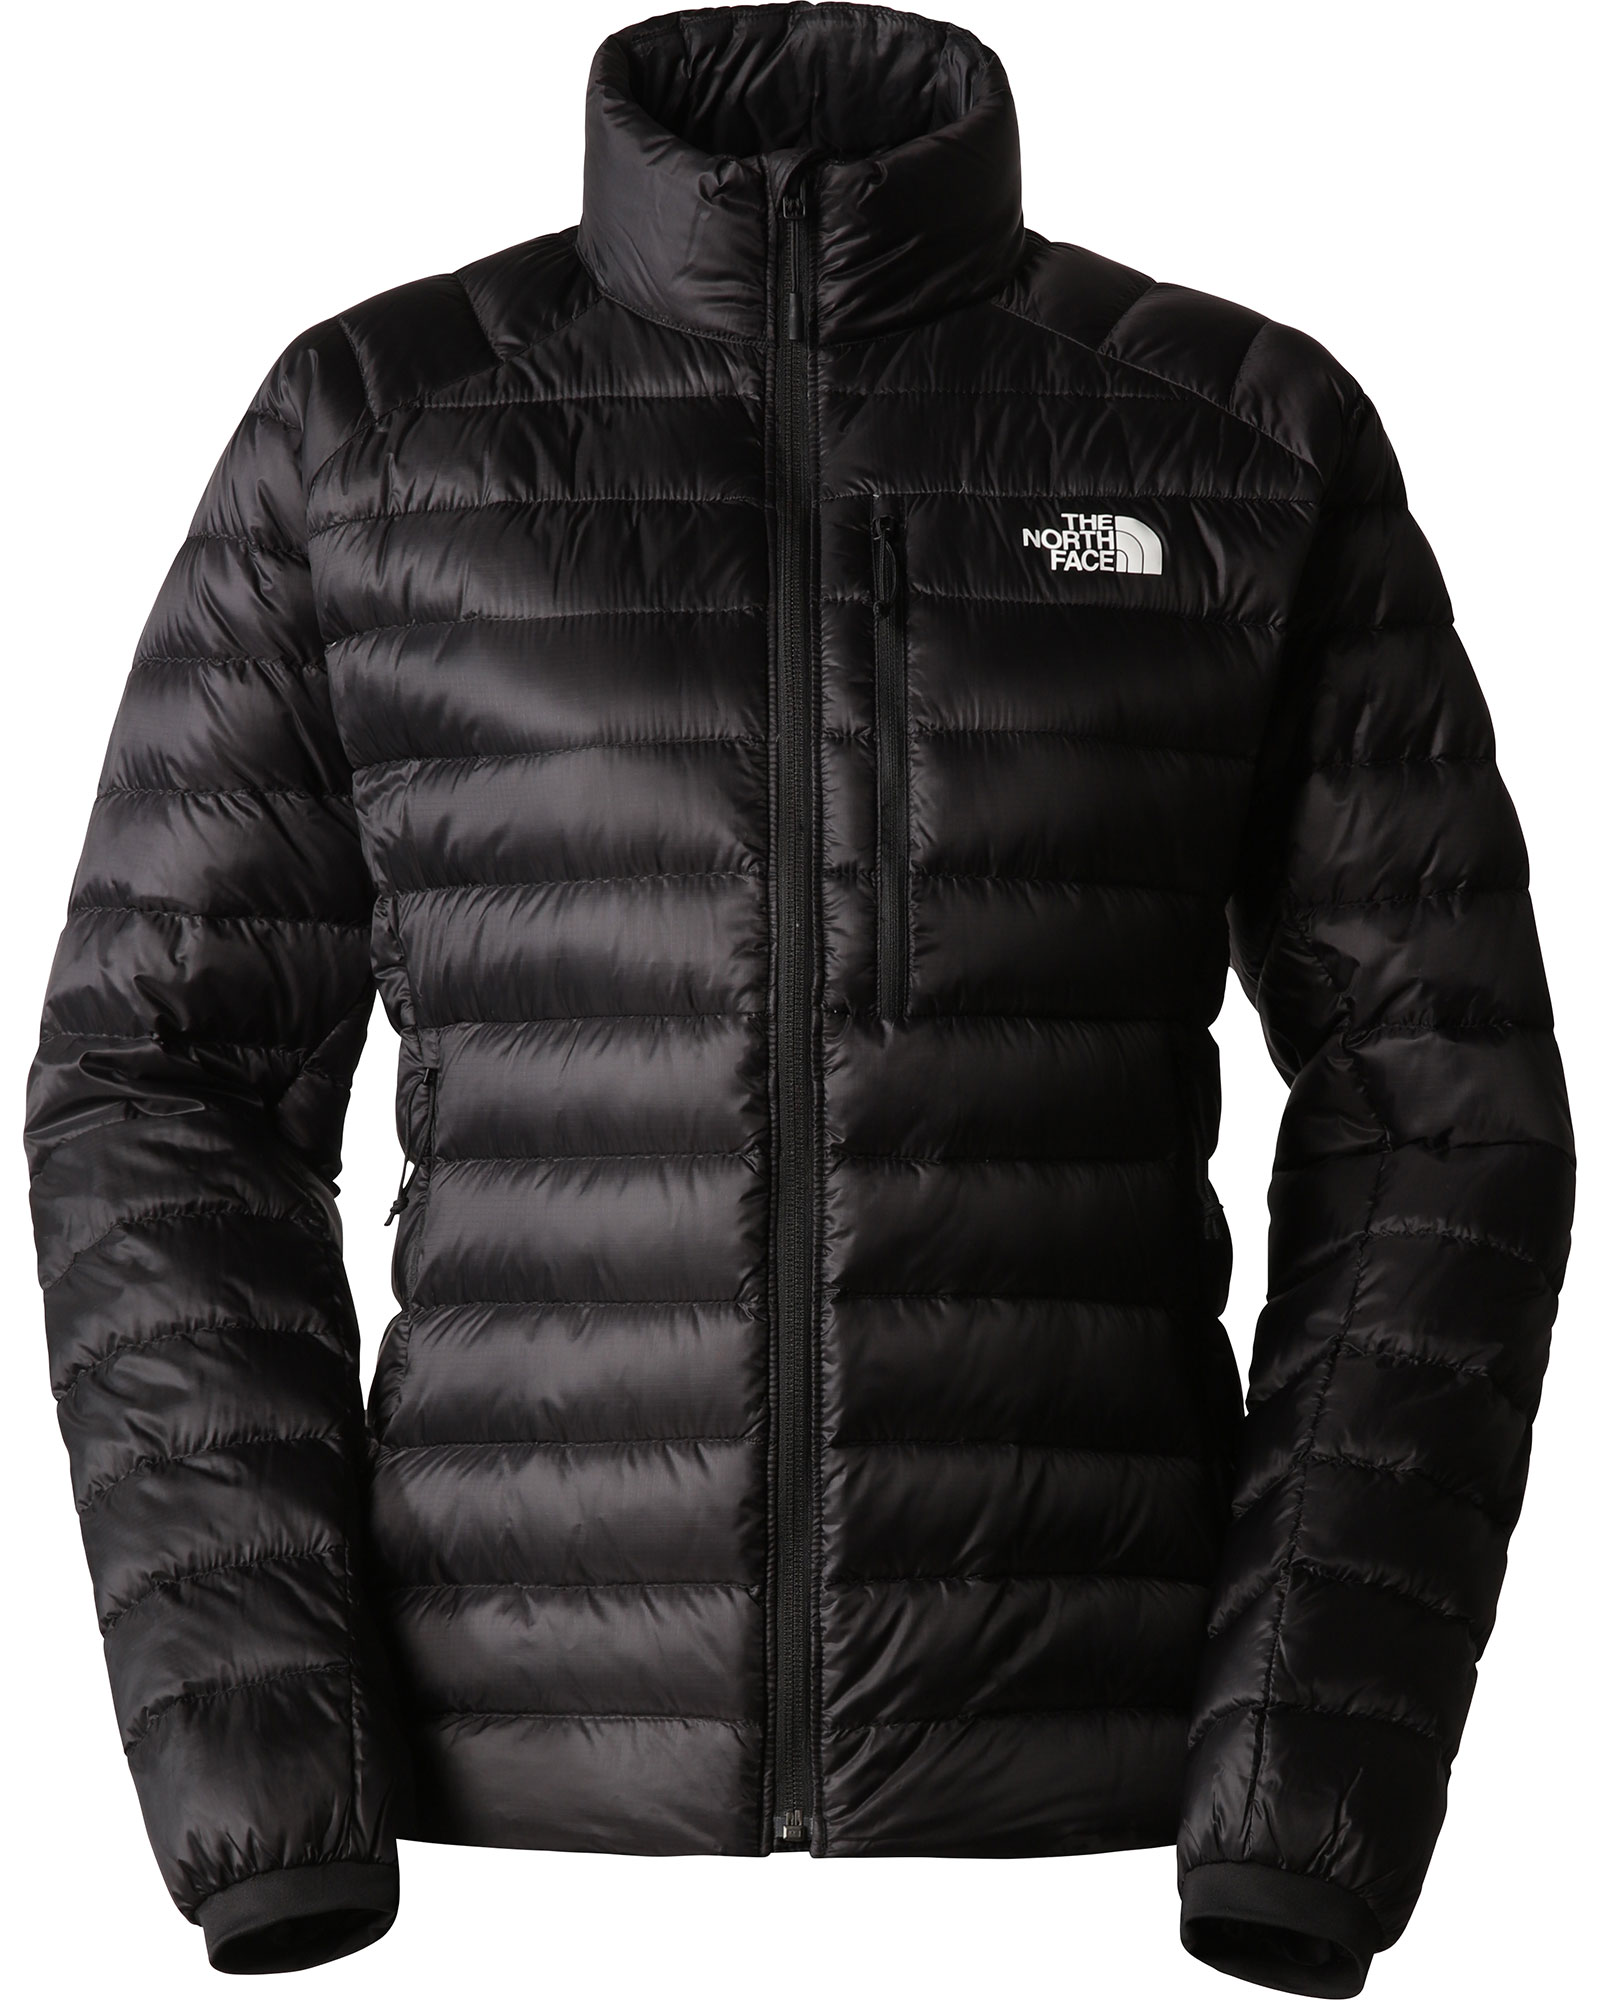 The North Face Summit Breithorn Women’s Down Jacket - TNF Black S